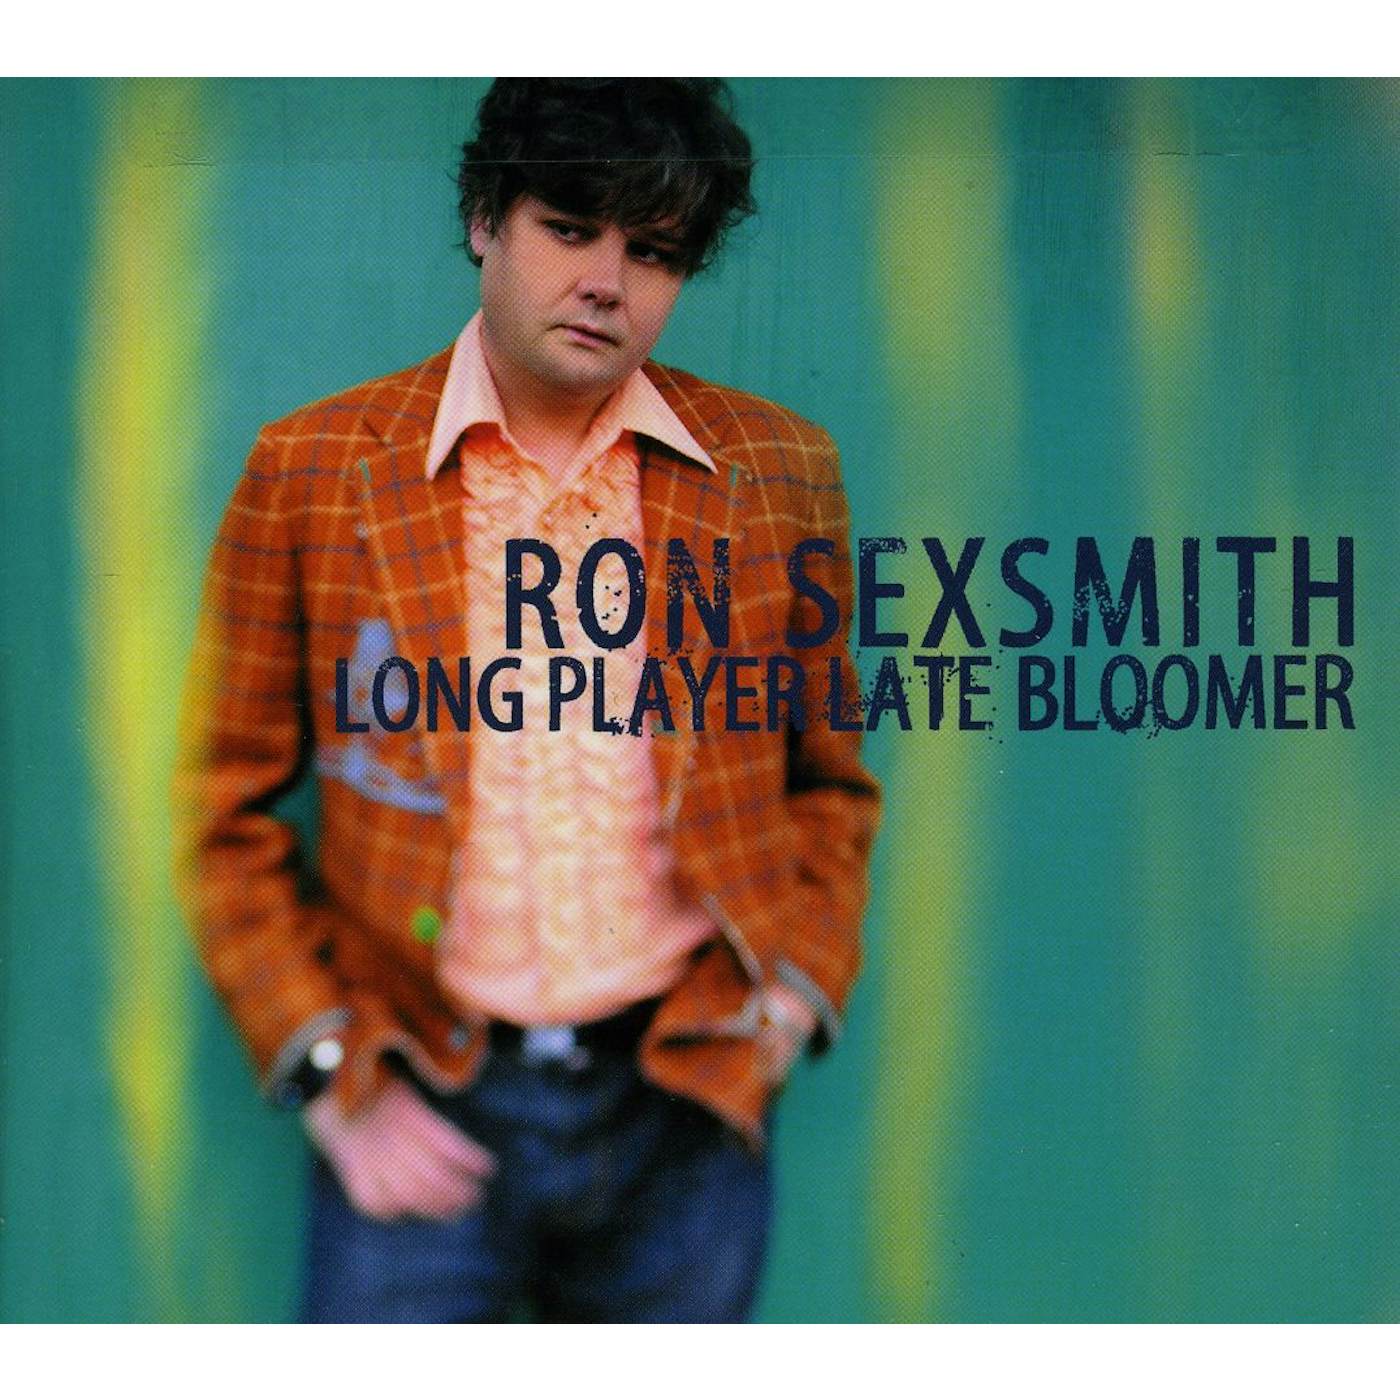 Ron Sexsmith LONG PLAYER LATE BLOOMER CD